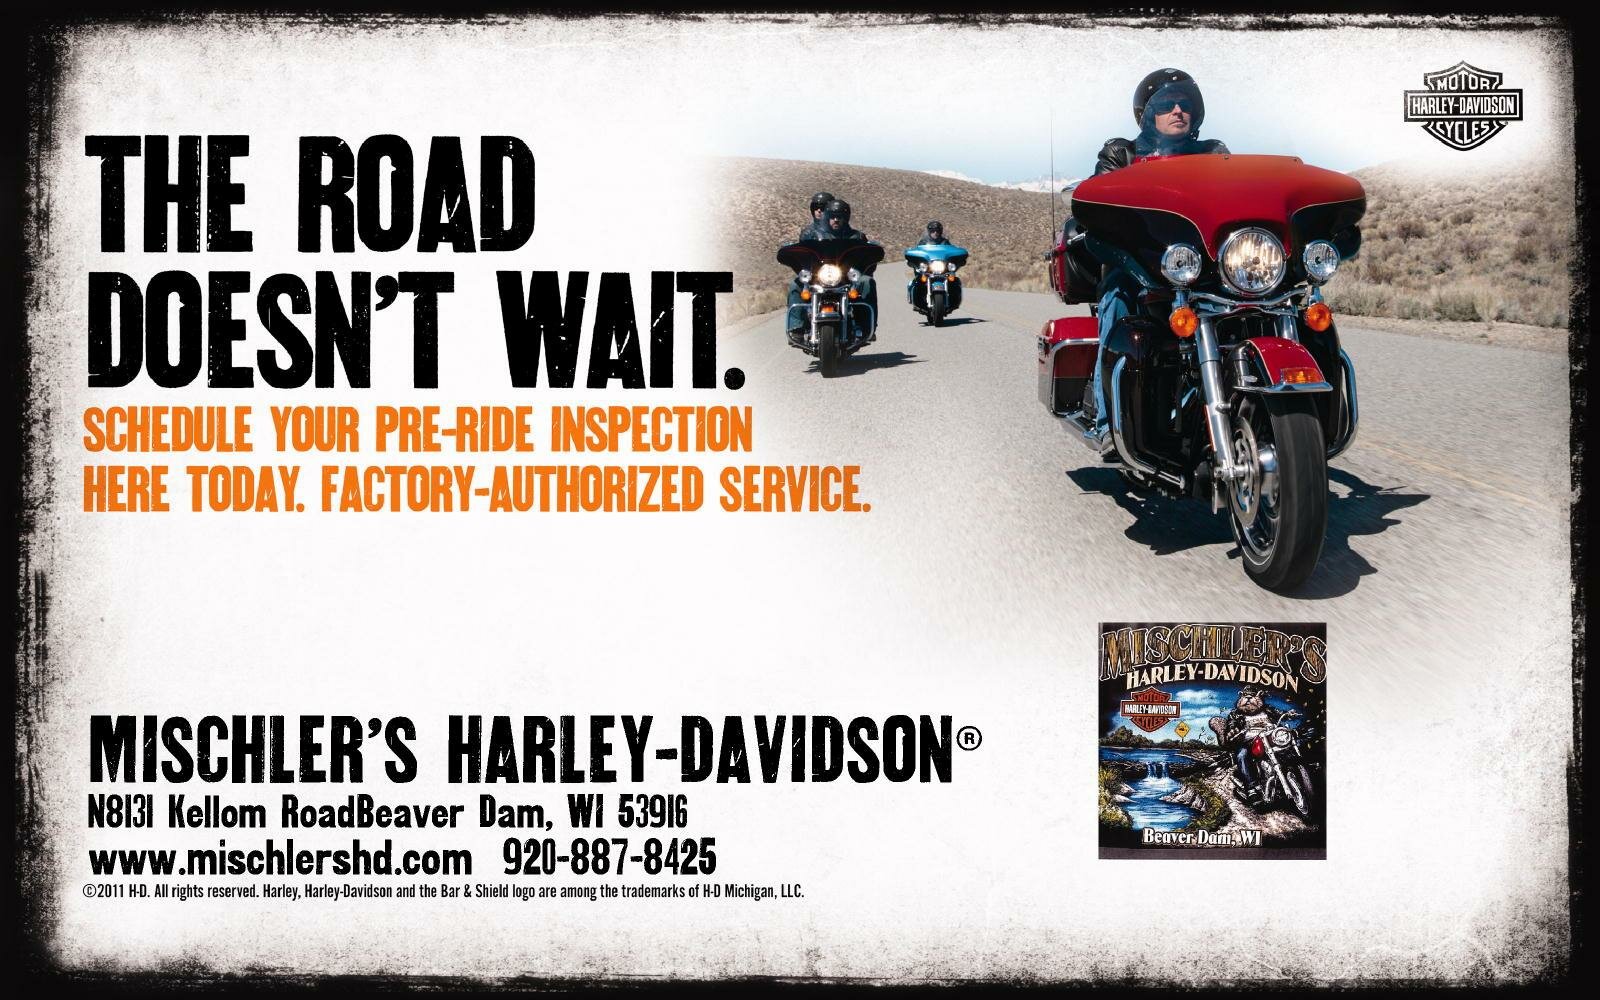 Mischler's Harley-Davidson of Beaver Dam, Wisconsin carries a wide variety of Harley parts and sccessories for your Harley Davidson bike